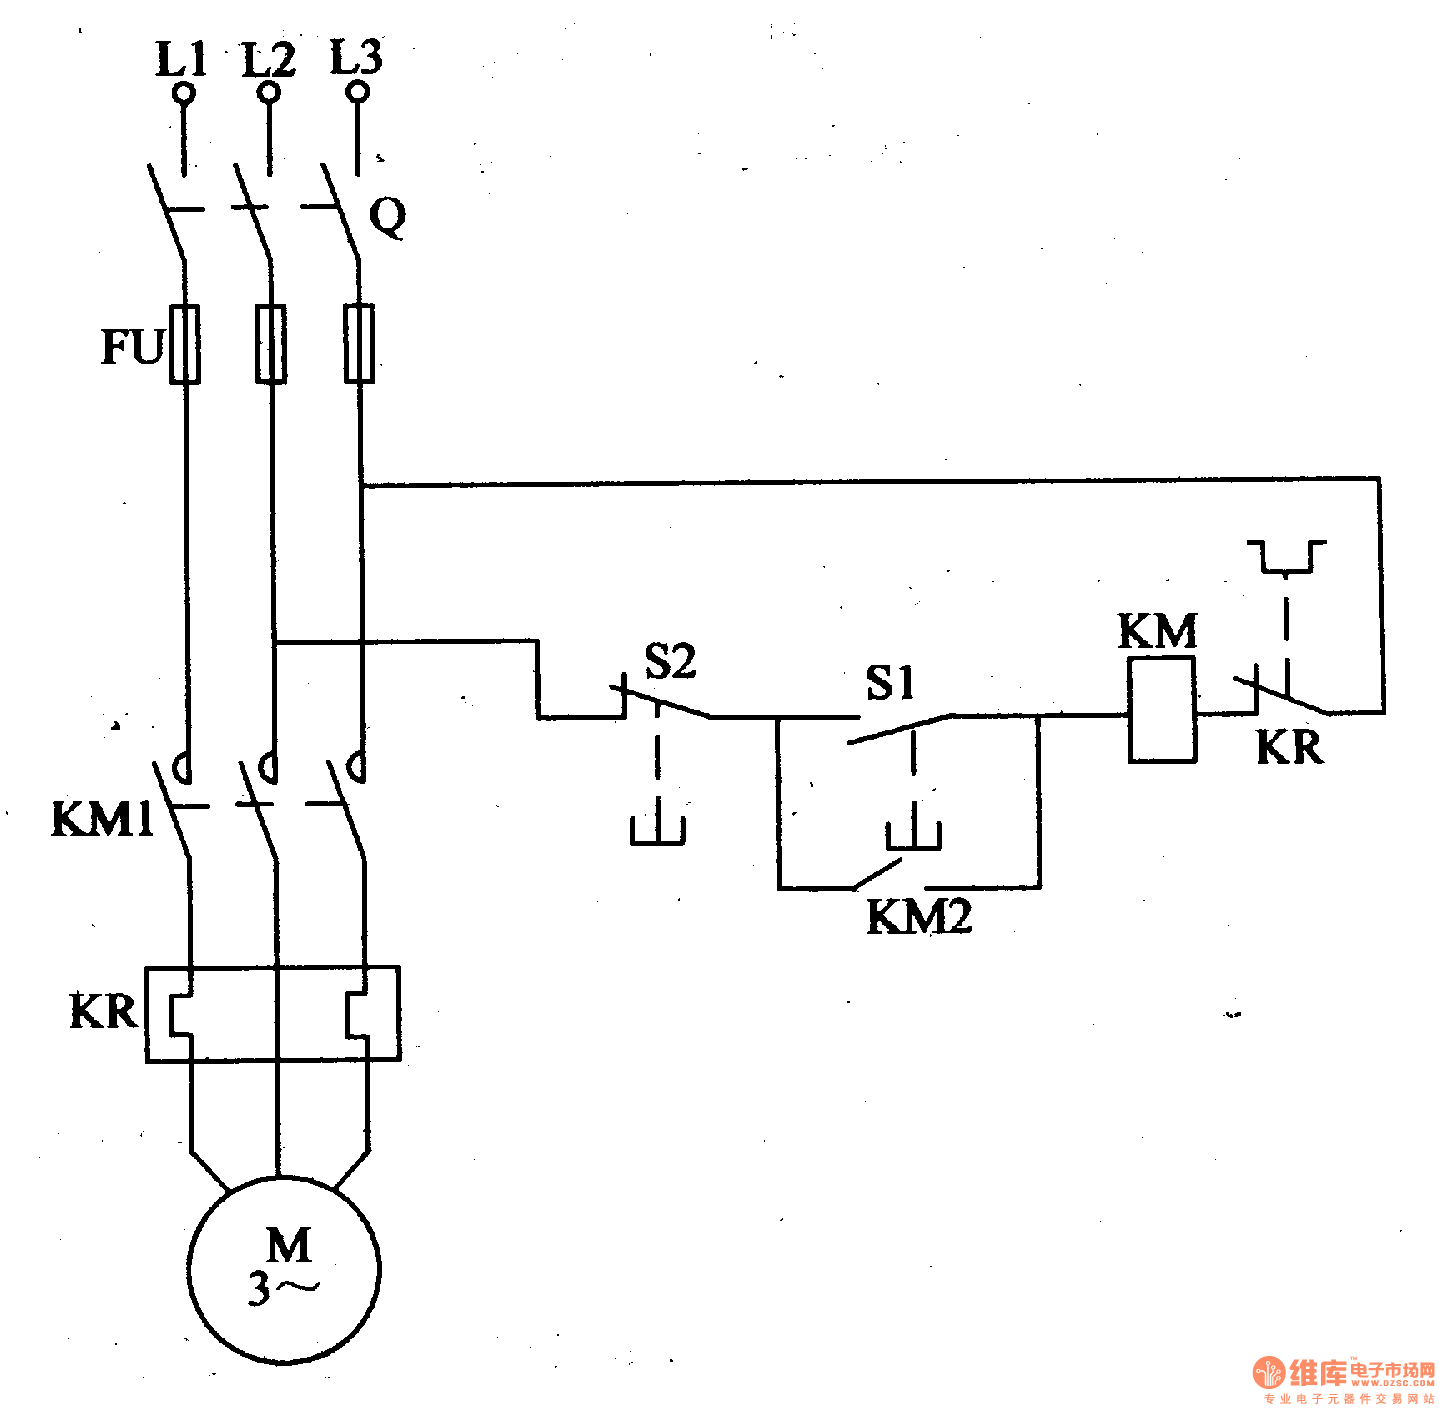 Common Electrical Motor Controlled Circuit (1) - Power ...